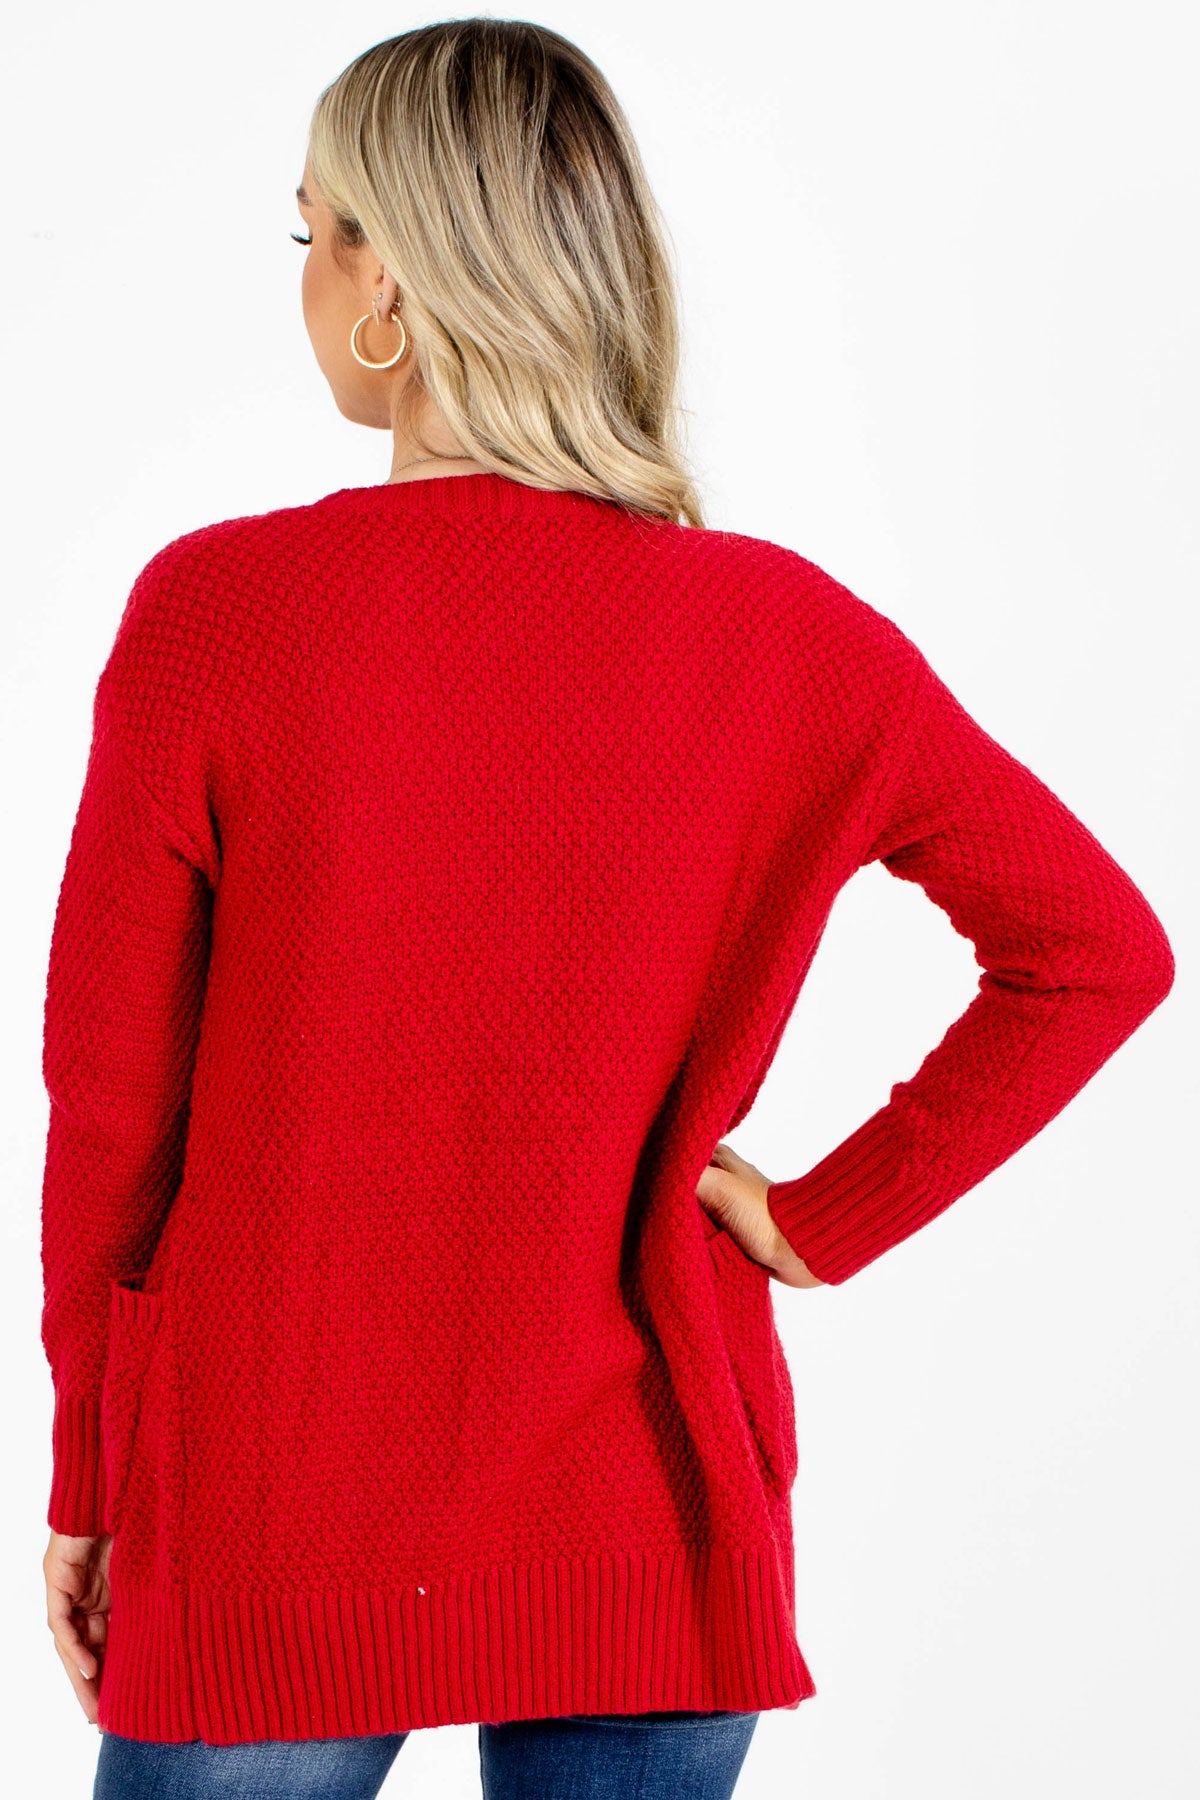 Women's red Cute and Comfortable Boutique Cardigan